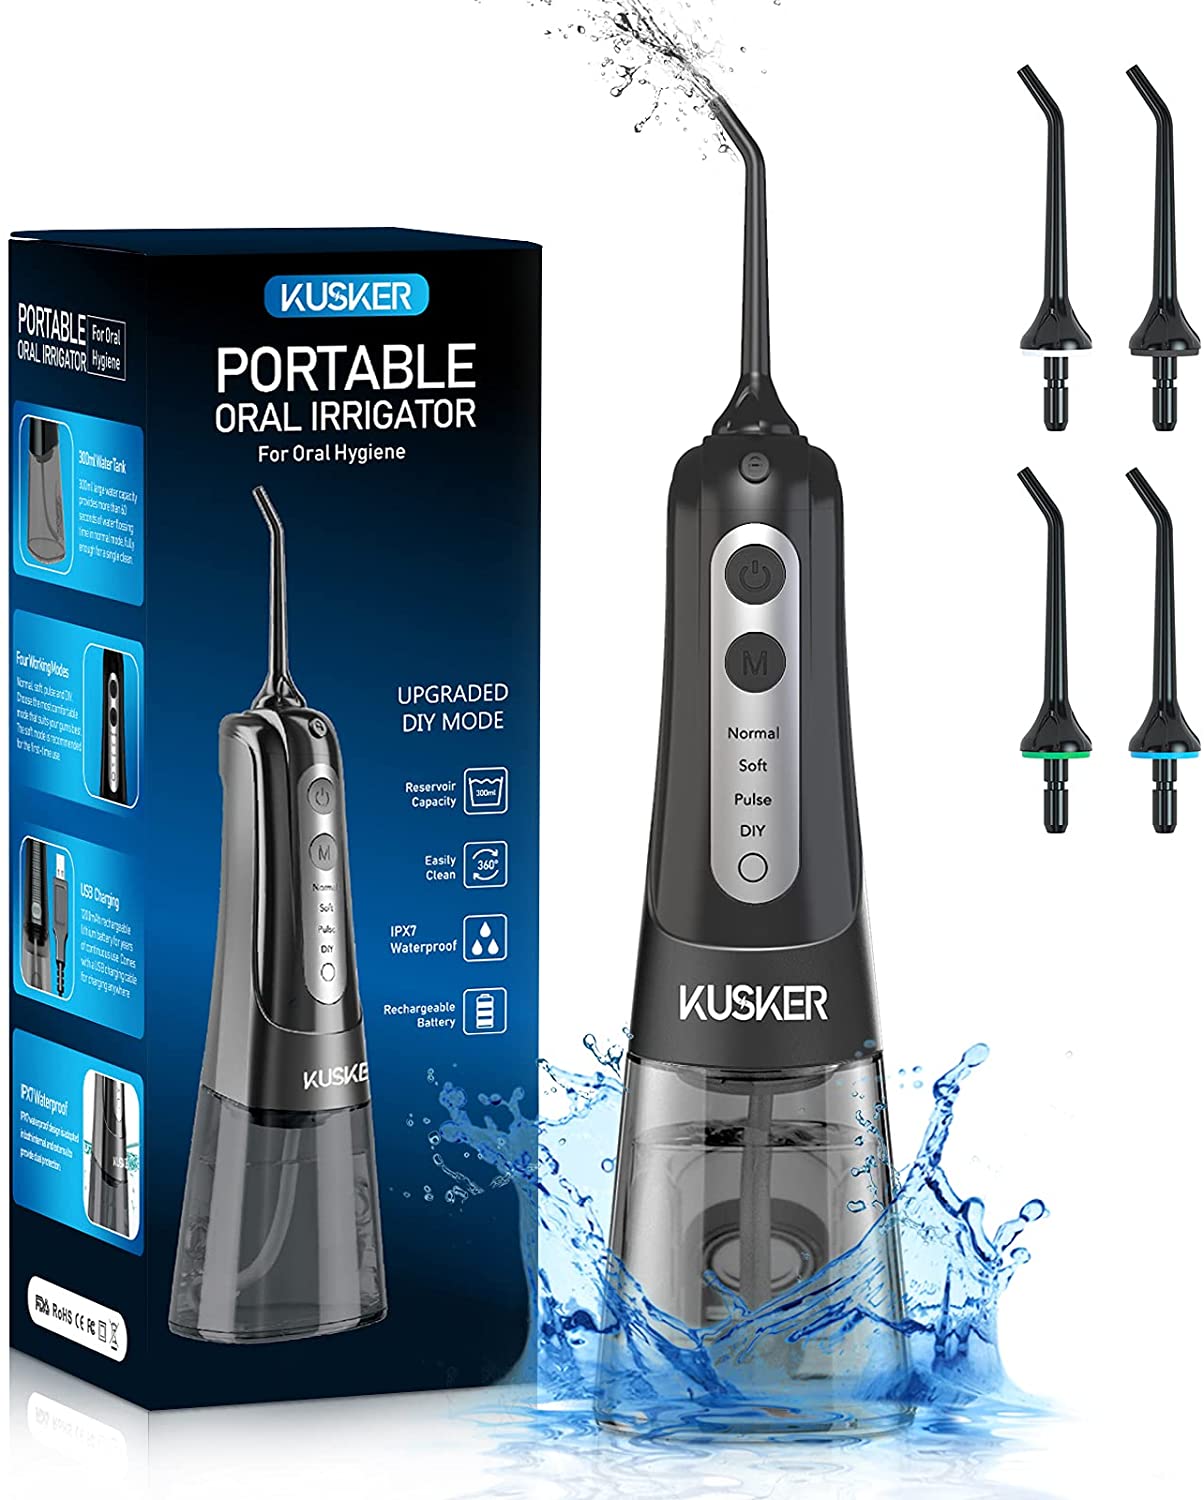 Water Flosser Cordless, KUSKER Portable Dental Oral Irrigator for Teeth, 4 Modes and 4 Jet Tips, IPX7 Waterproof, Rechargeable for 30-Days Use, Home, Travel, Braces, Bridges Care - Home Decor Gifts and More